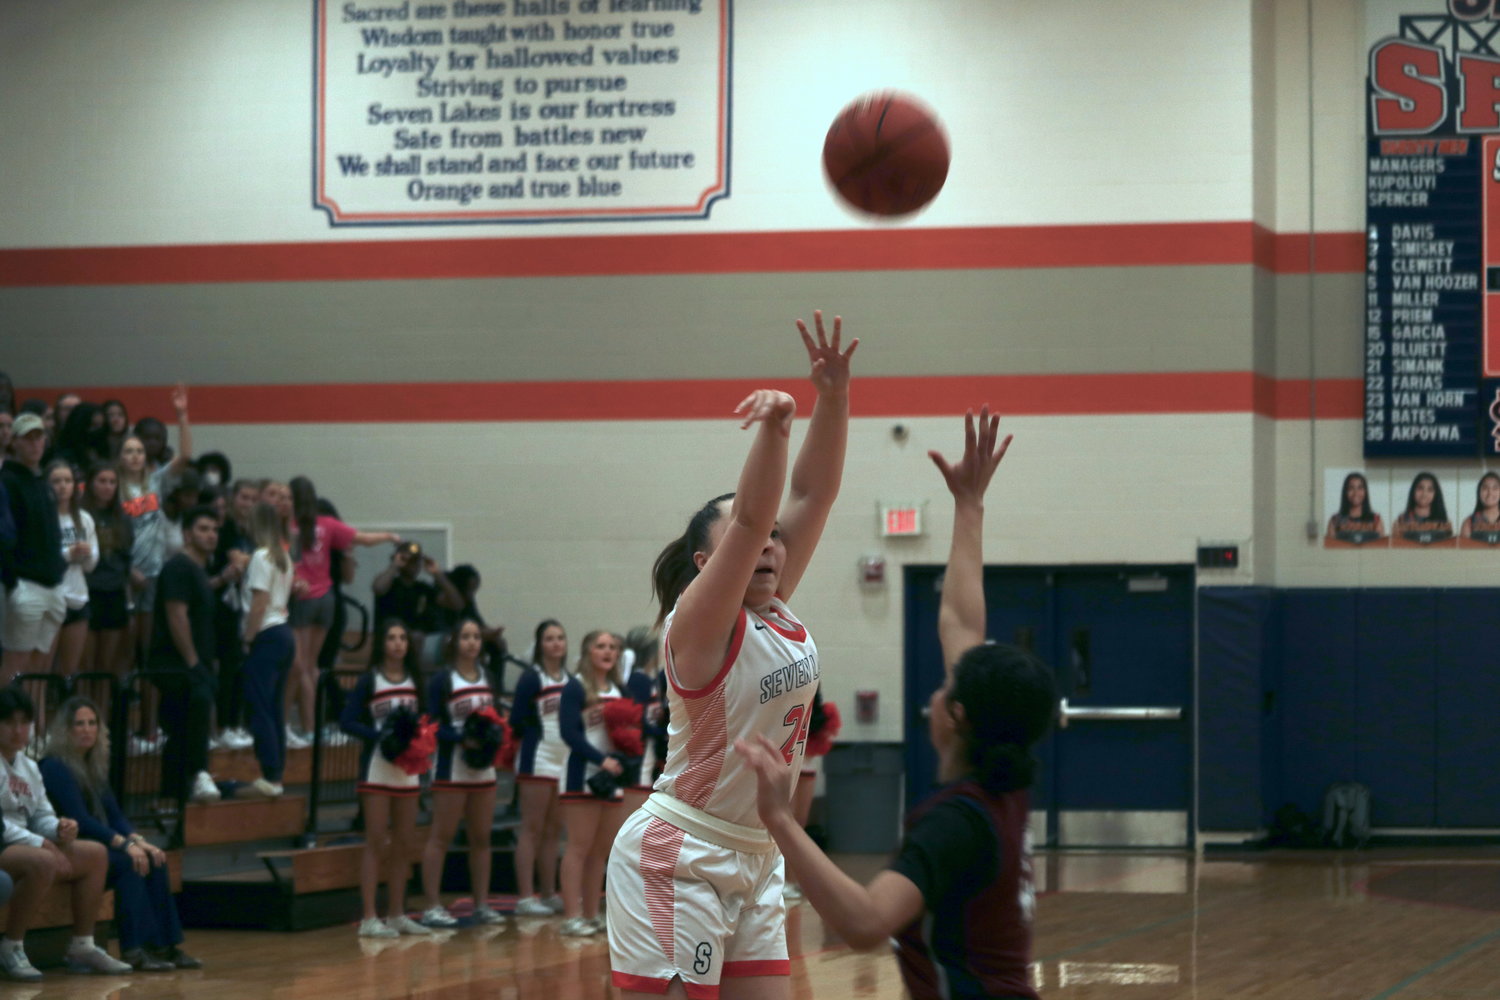 Alex Kainer shoots a 3-pointer during Tuesday’s game against Tompkins at the Seven Lakes gym.